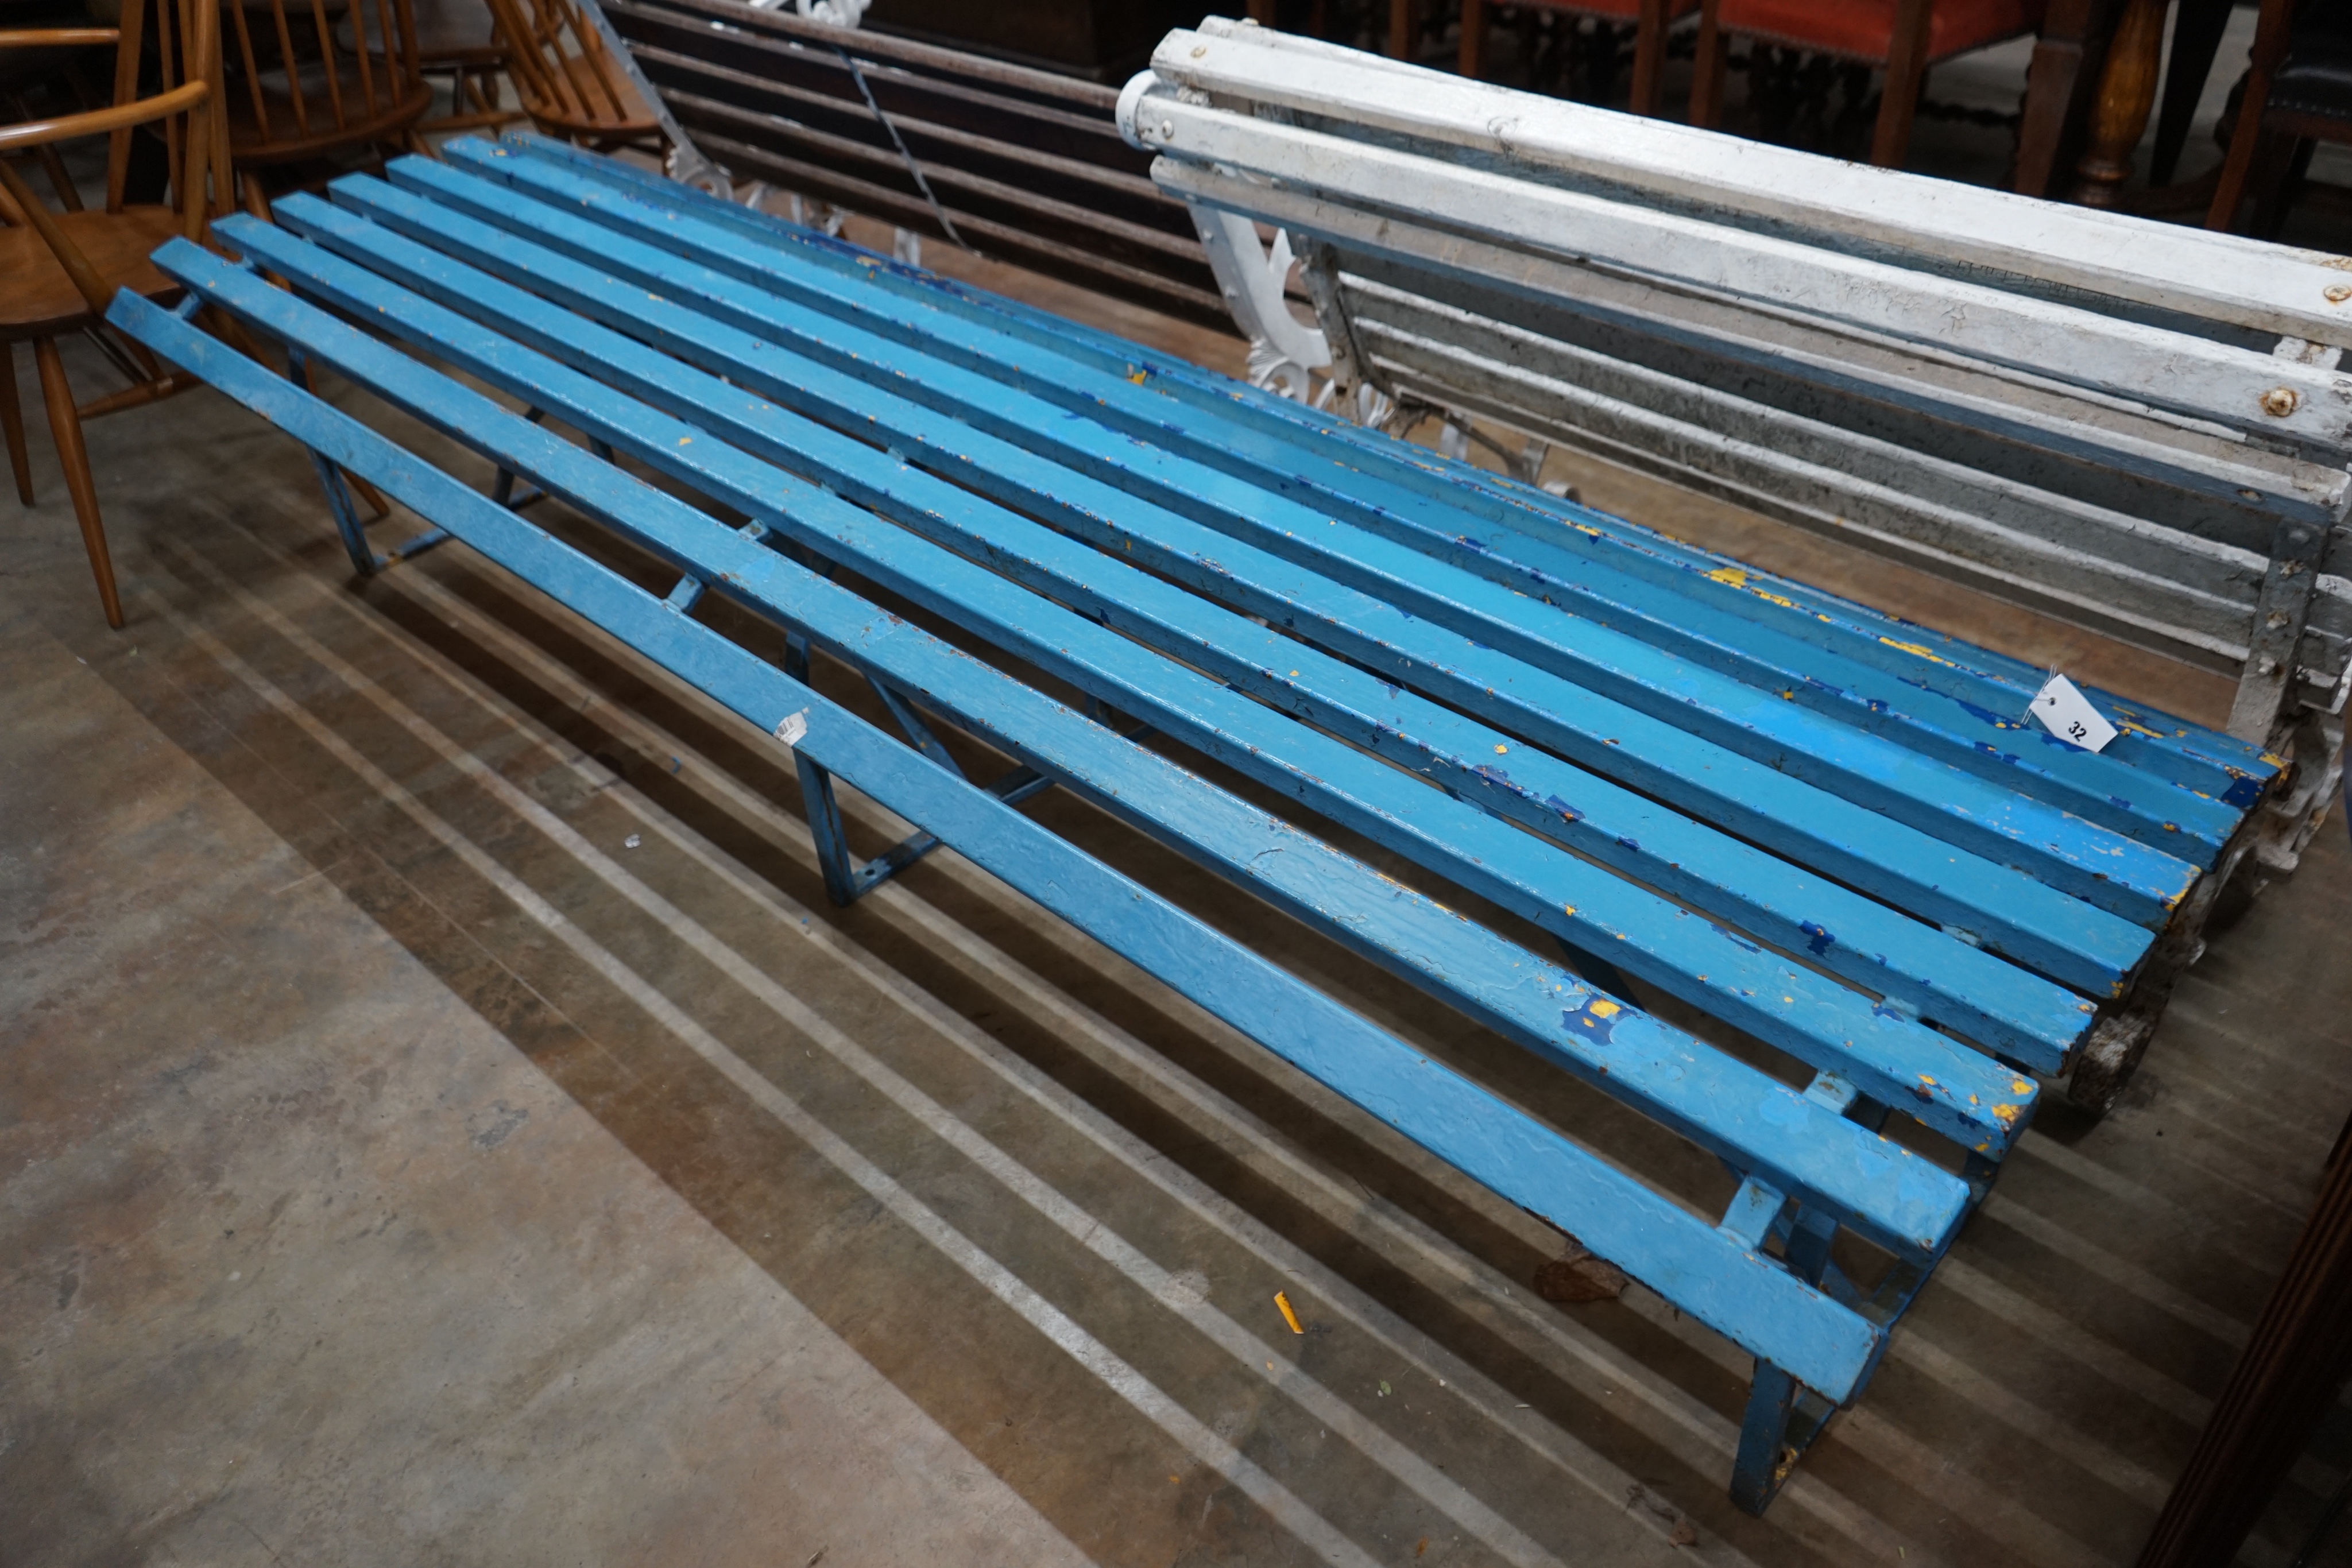 A painted slatted wrought iron park or station platform bench, length 240cm depth 70cm height 50cm